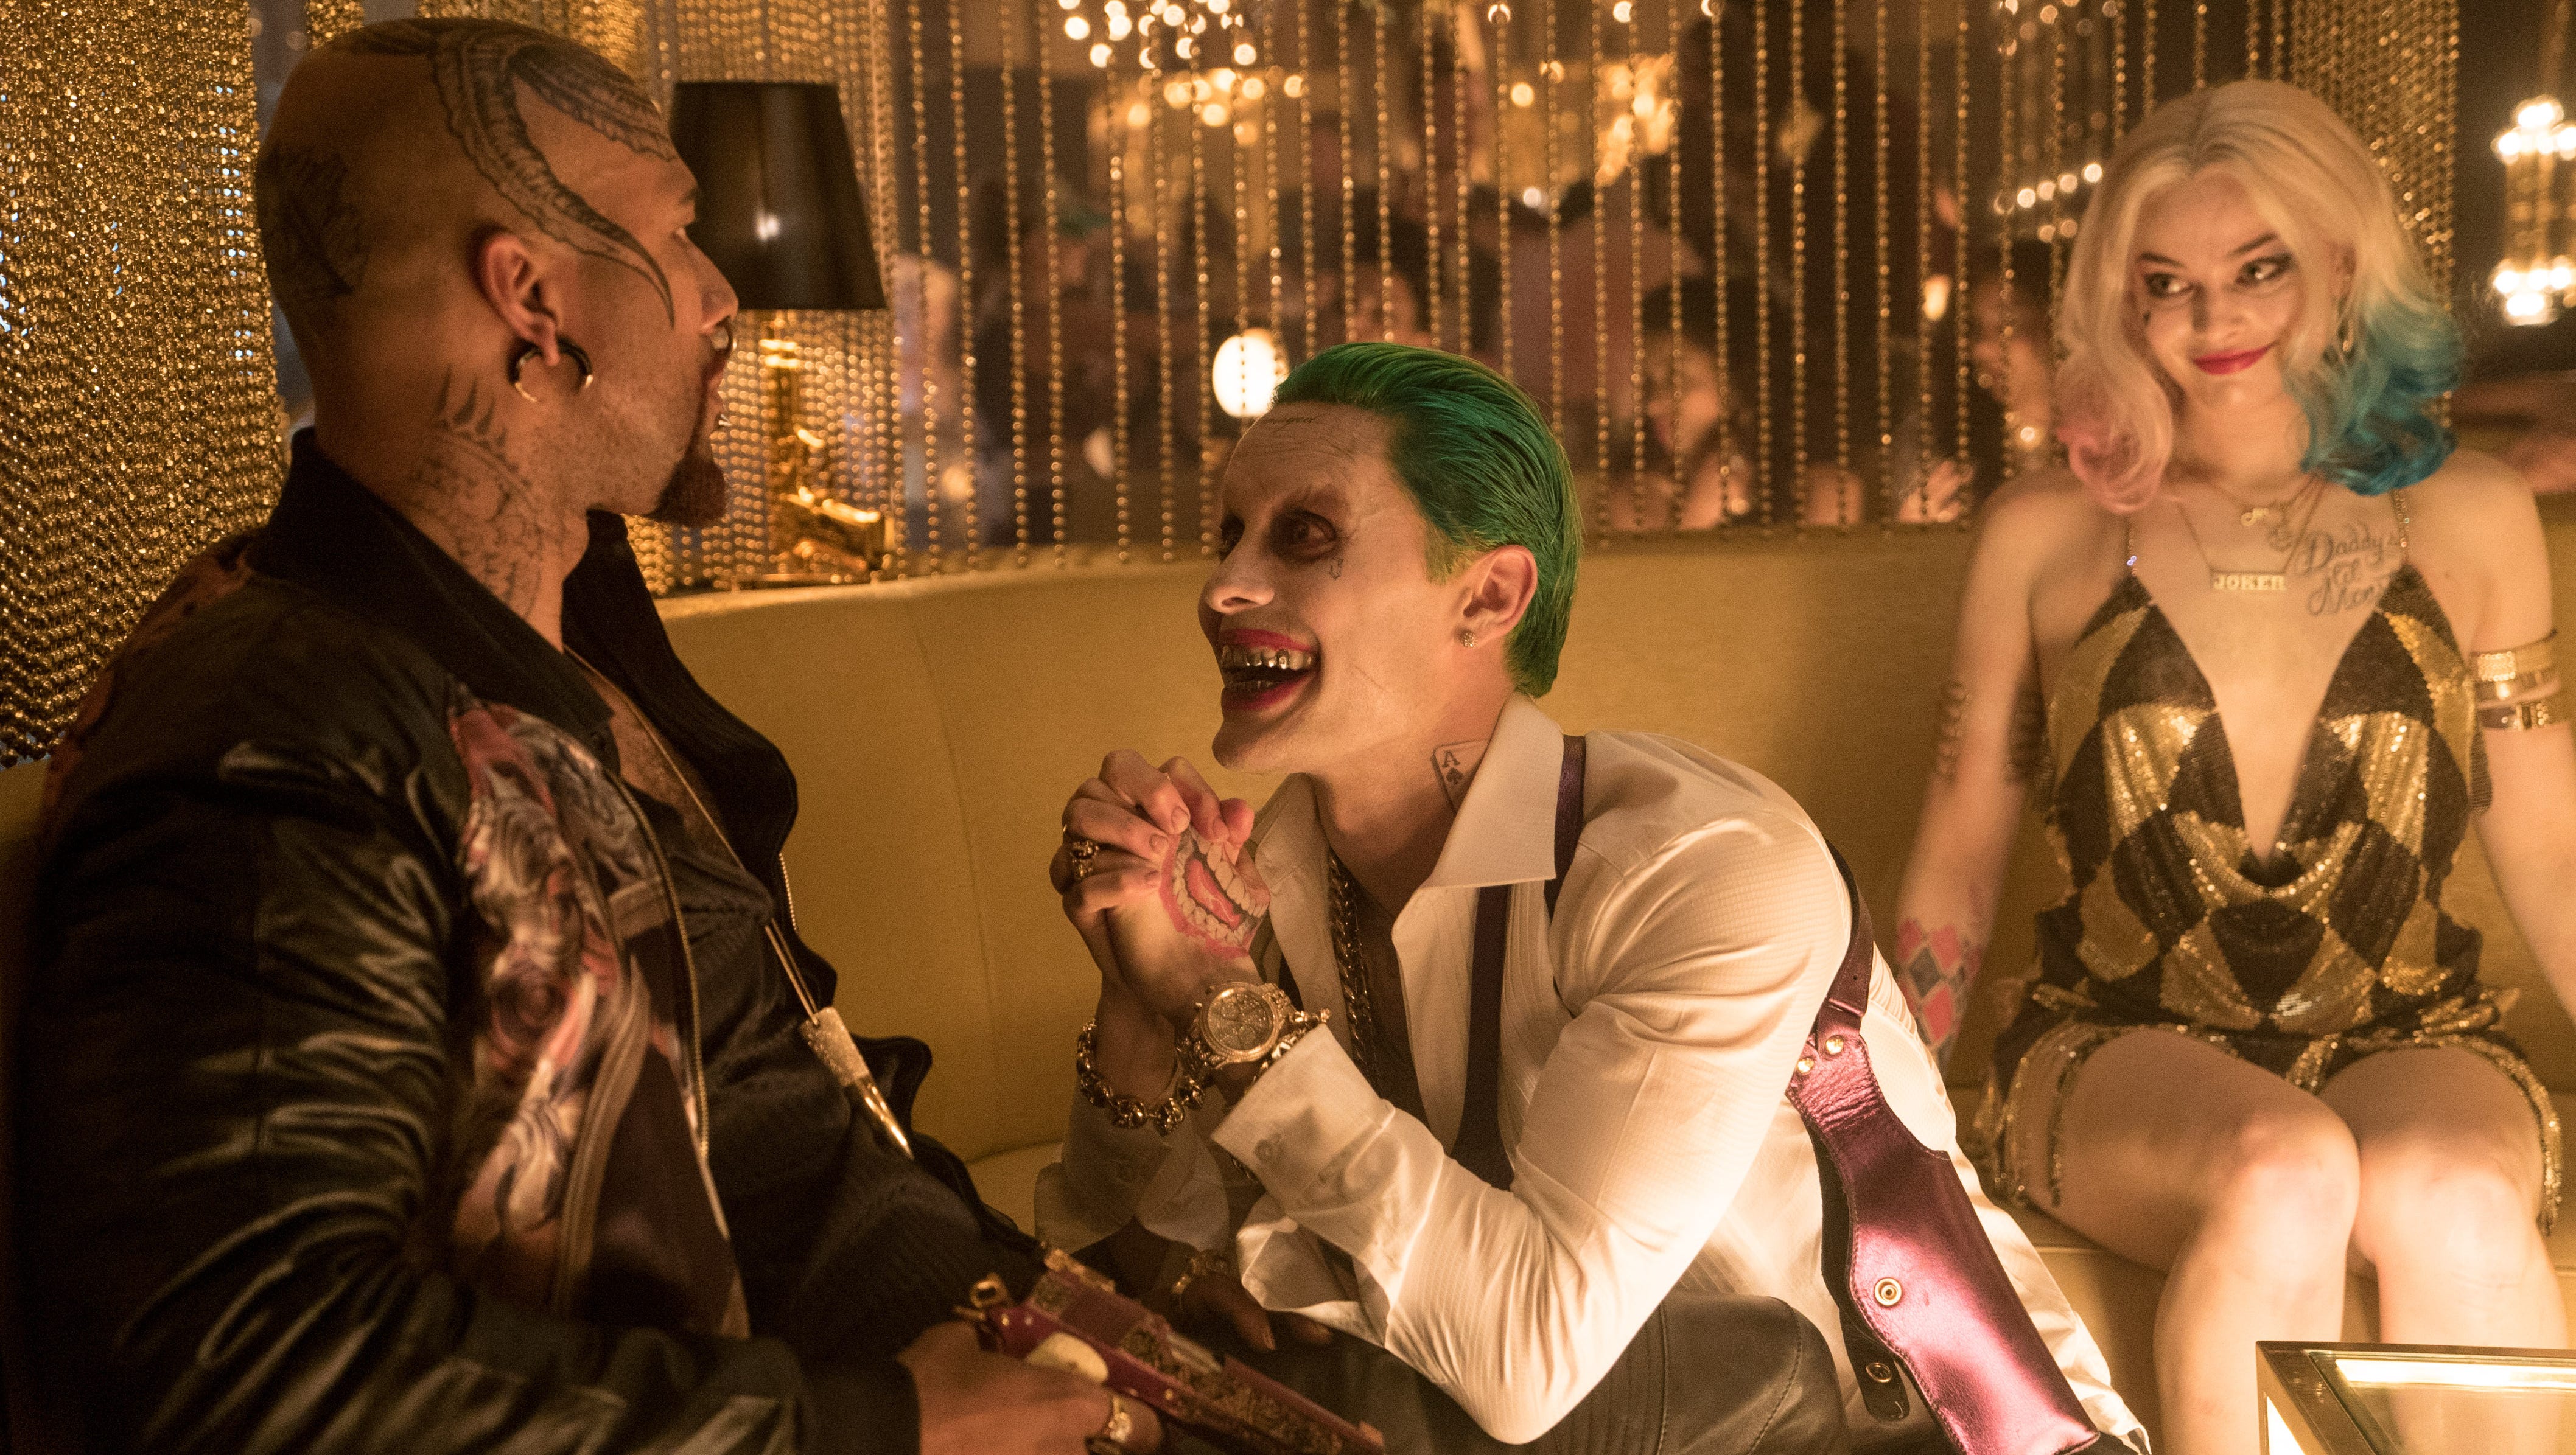 Of course Jared Leto gave his 'Suicide Squad' co-star porn, sex toys